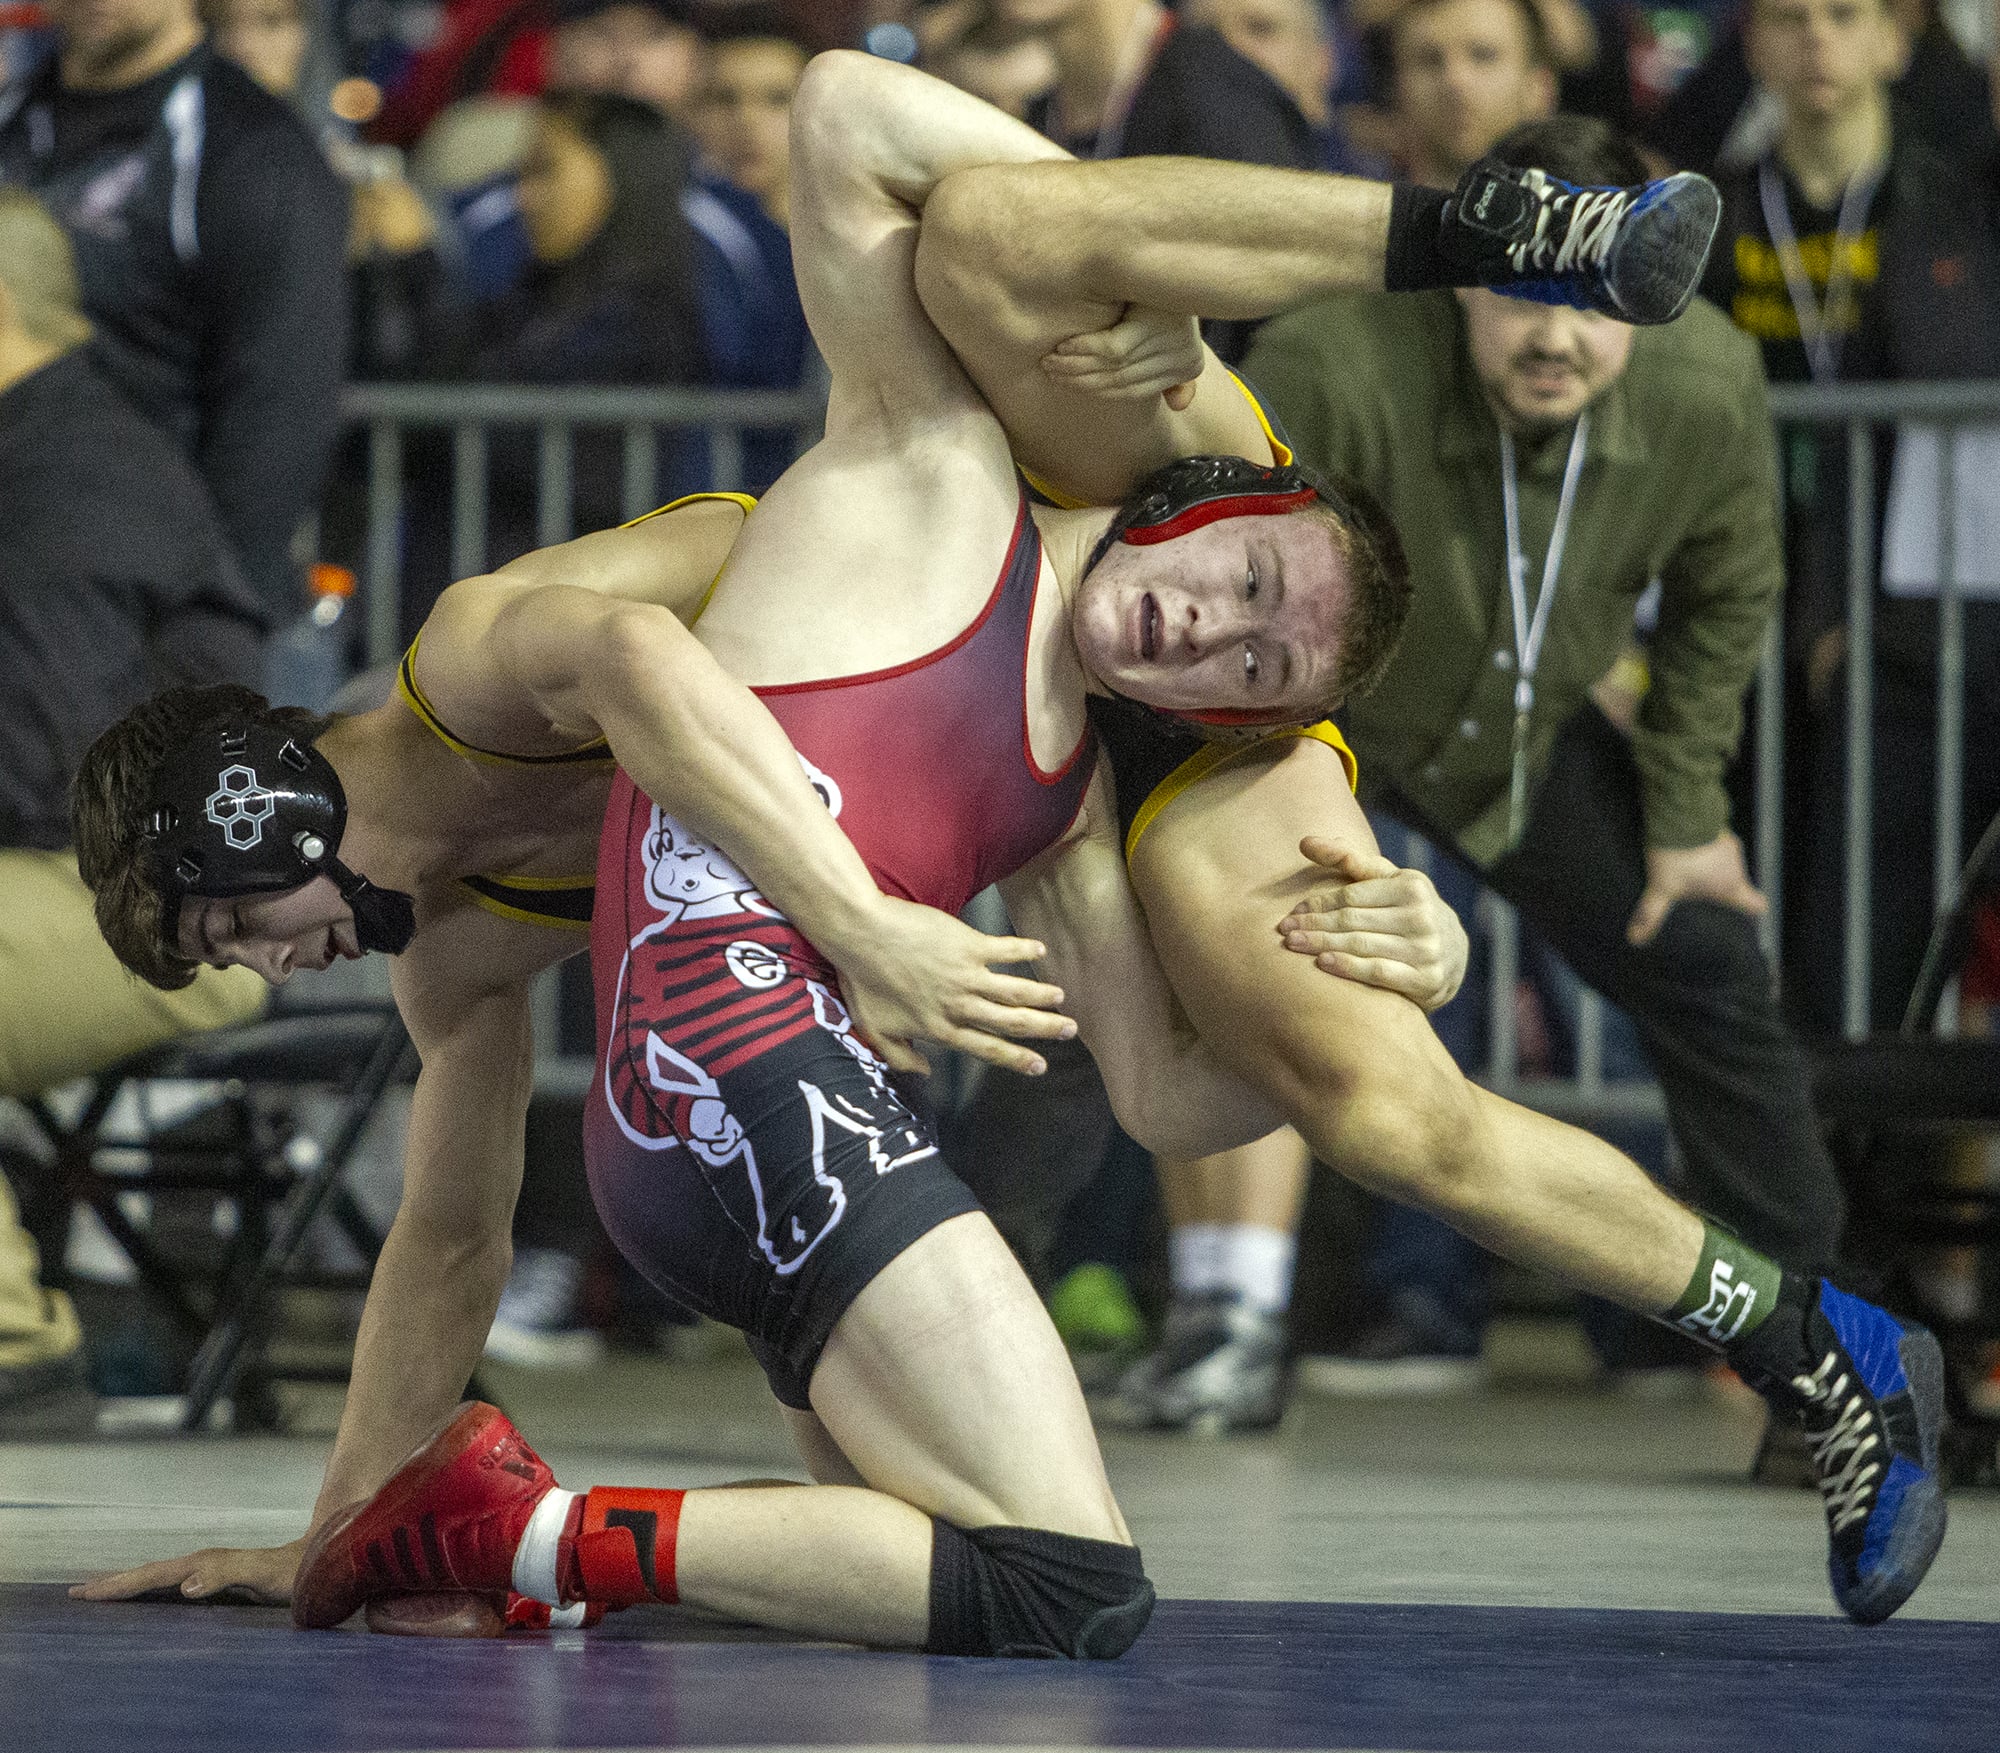 Camas' Tanner Craig grabs the legs of his Tahoma opponent, Steele Starren, during their 138-pound semifinals match on Saturday, Feb. 16, 2019, at the Mat Classic XXXI Championships held in the Tacoma Dome. Craig defeated Starren 5-3 in overtime.